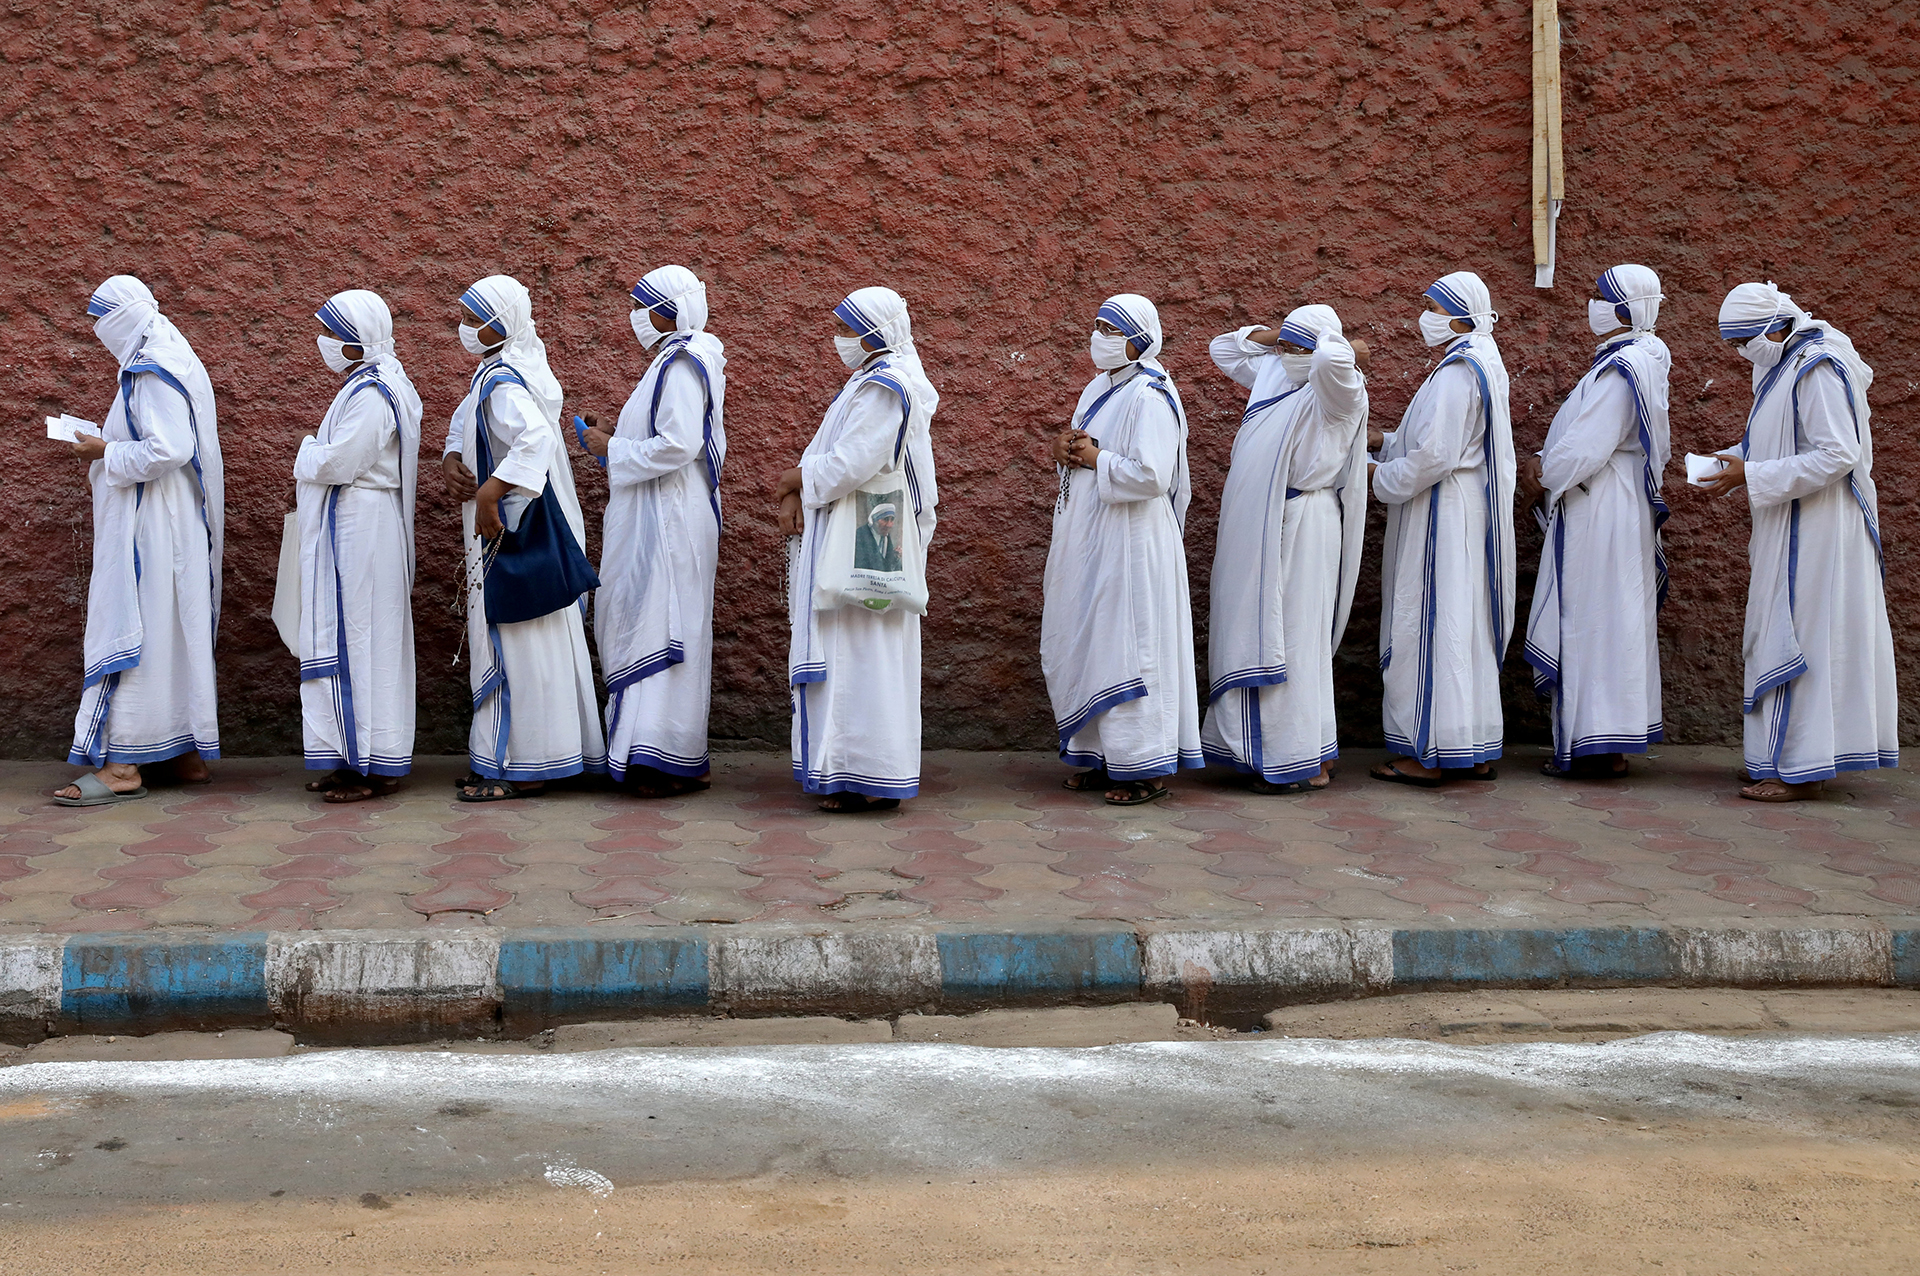 Catholic nuns from the Missionaries of Charity wait in line to cast their vote at a polling station in Kolkata